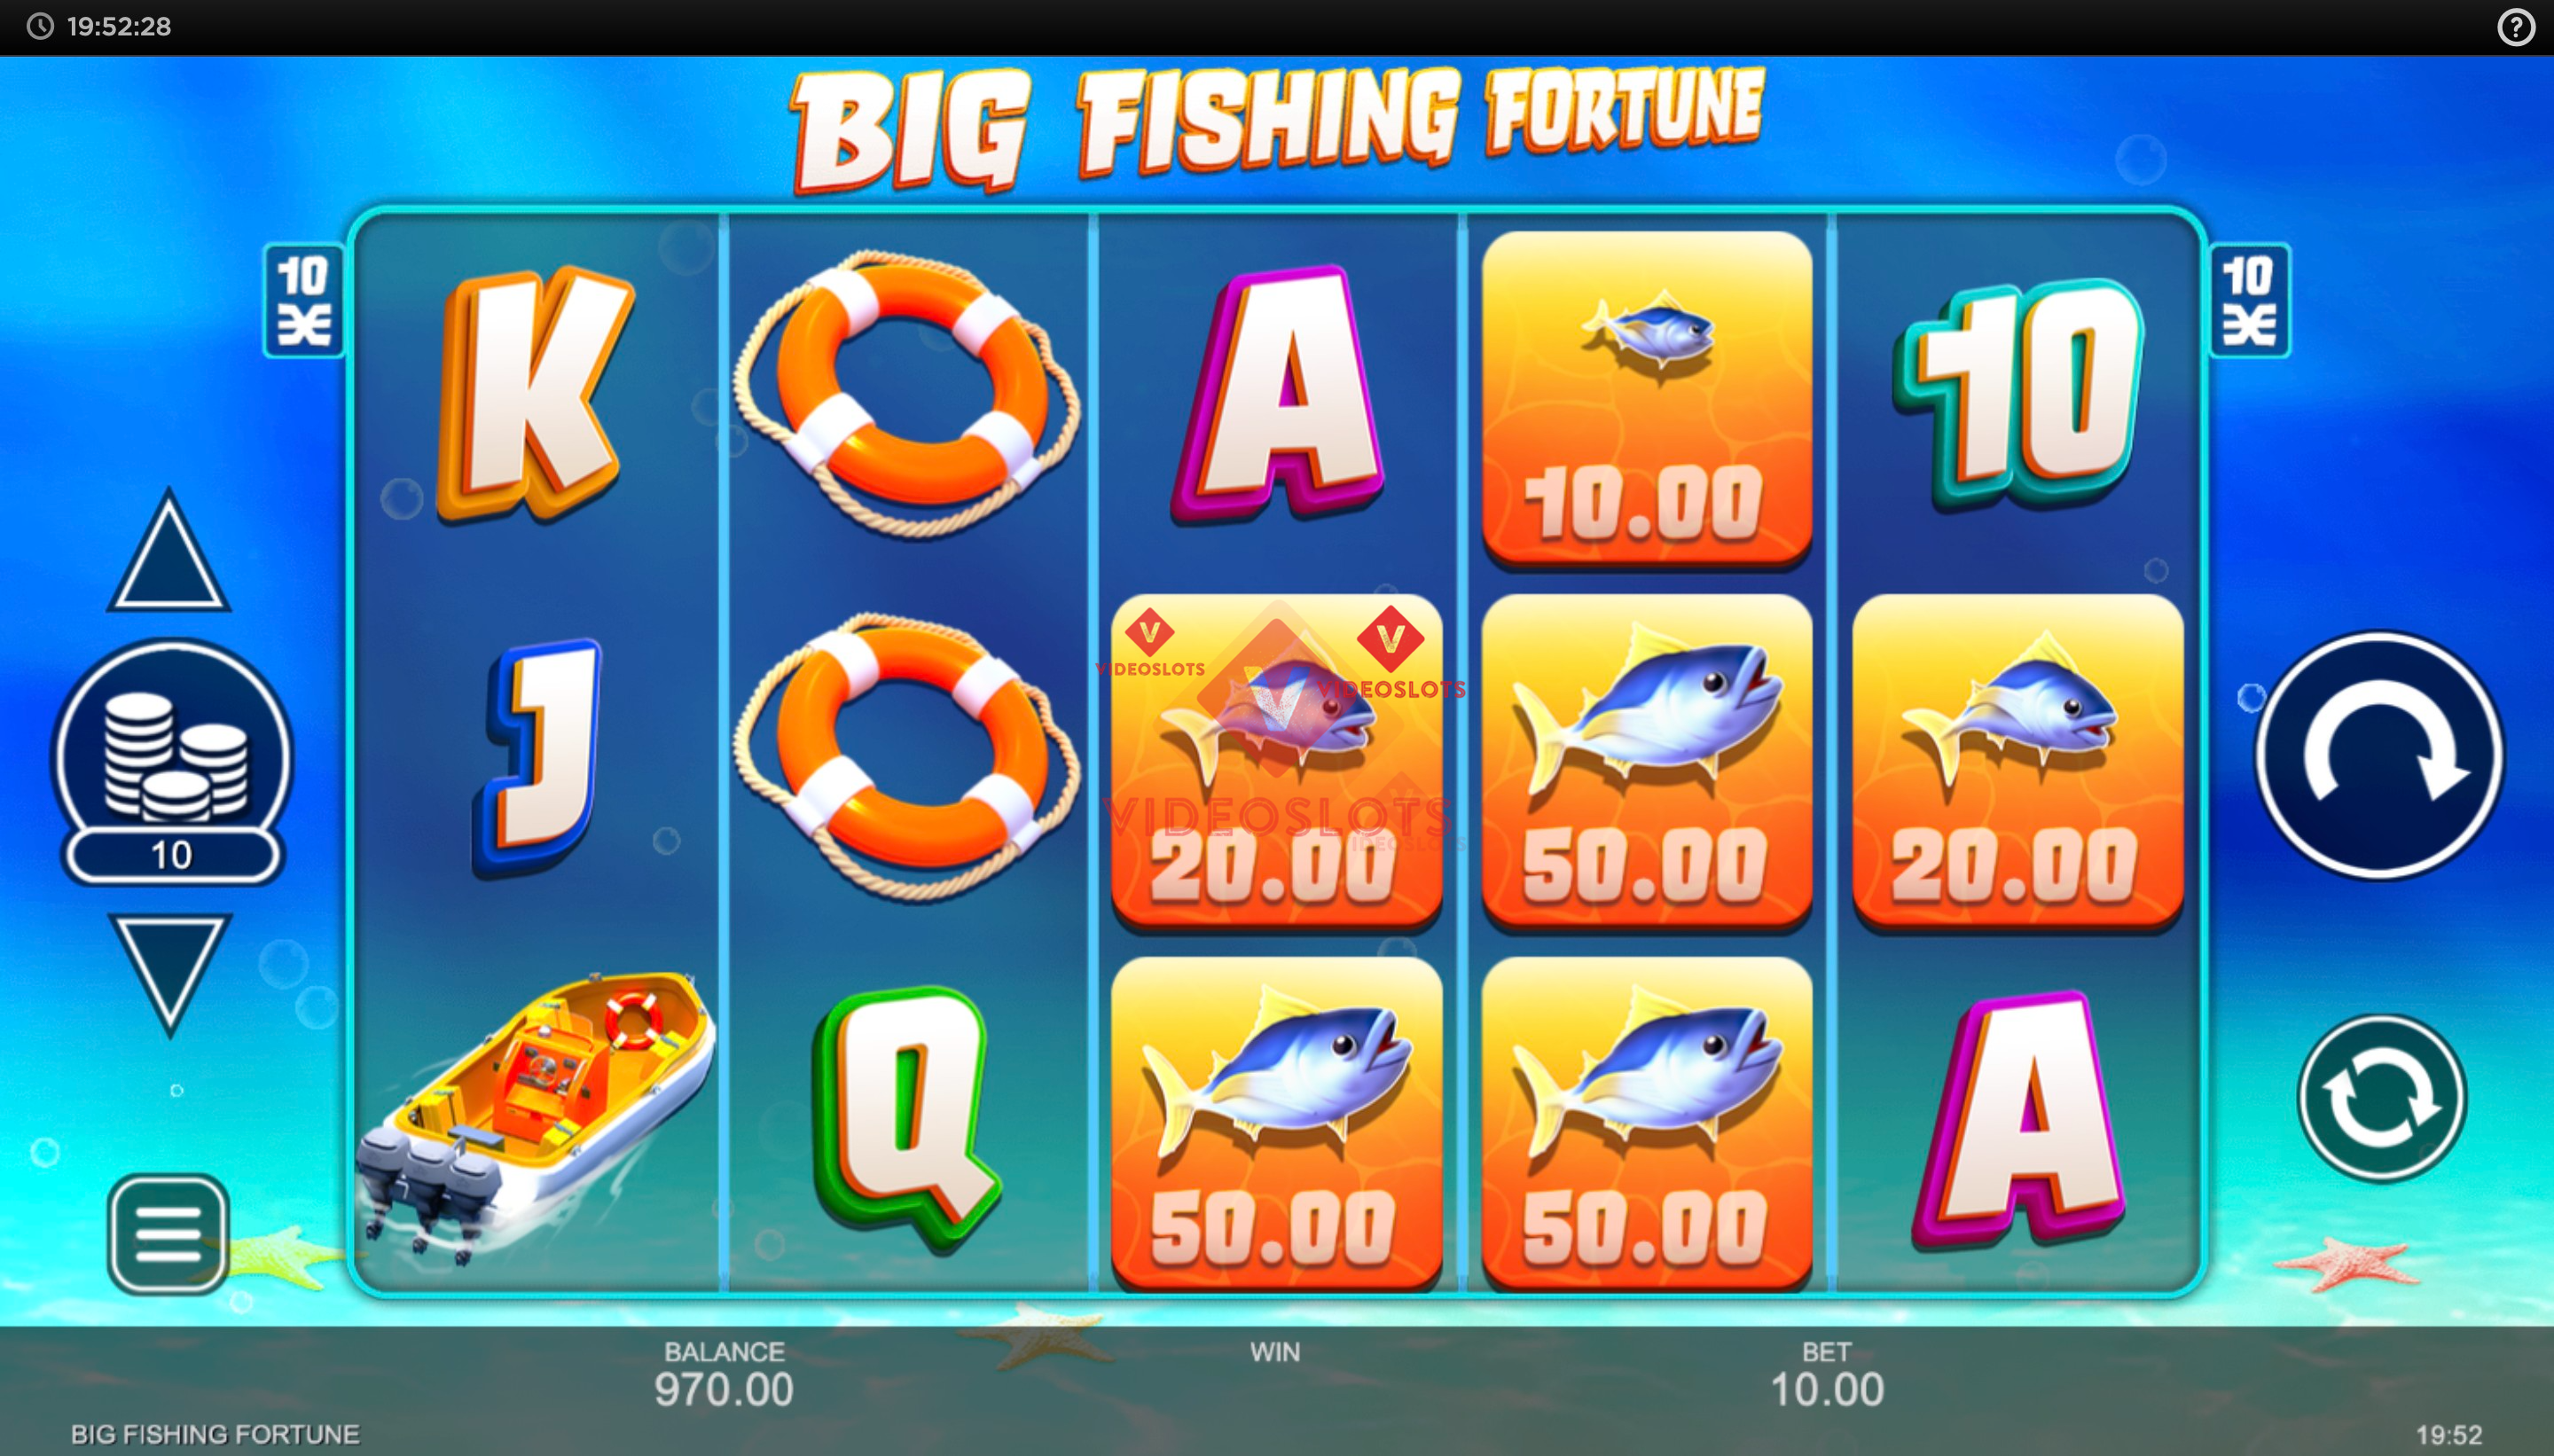 Base Game for Big Fishing Fortune slot from Inspired Gaming